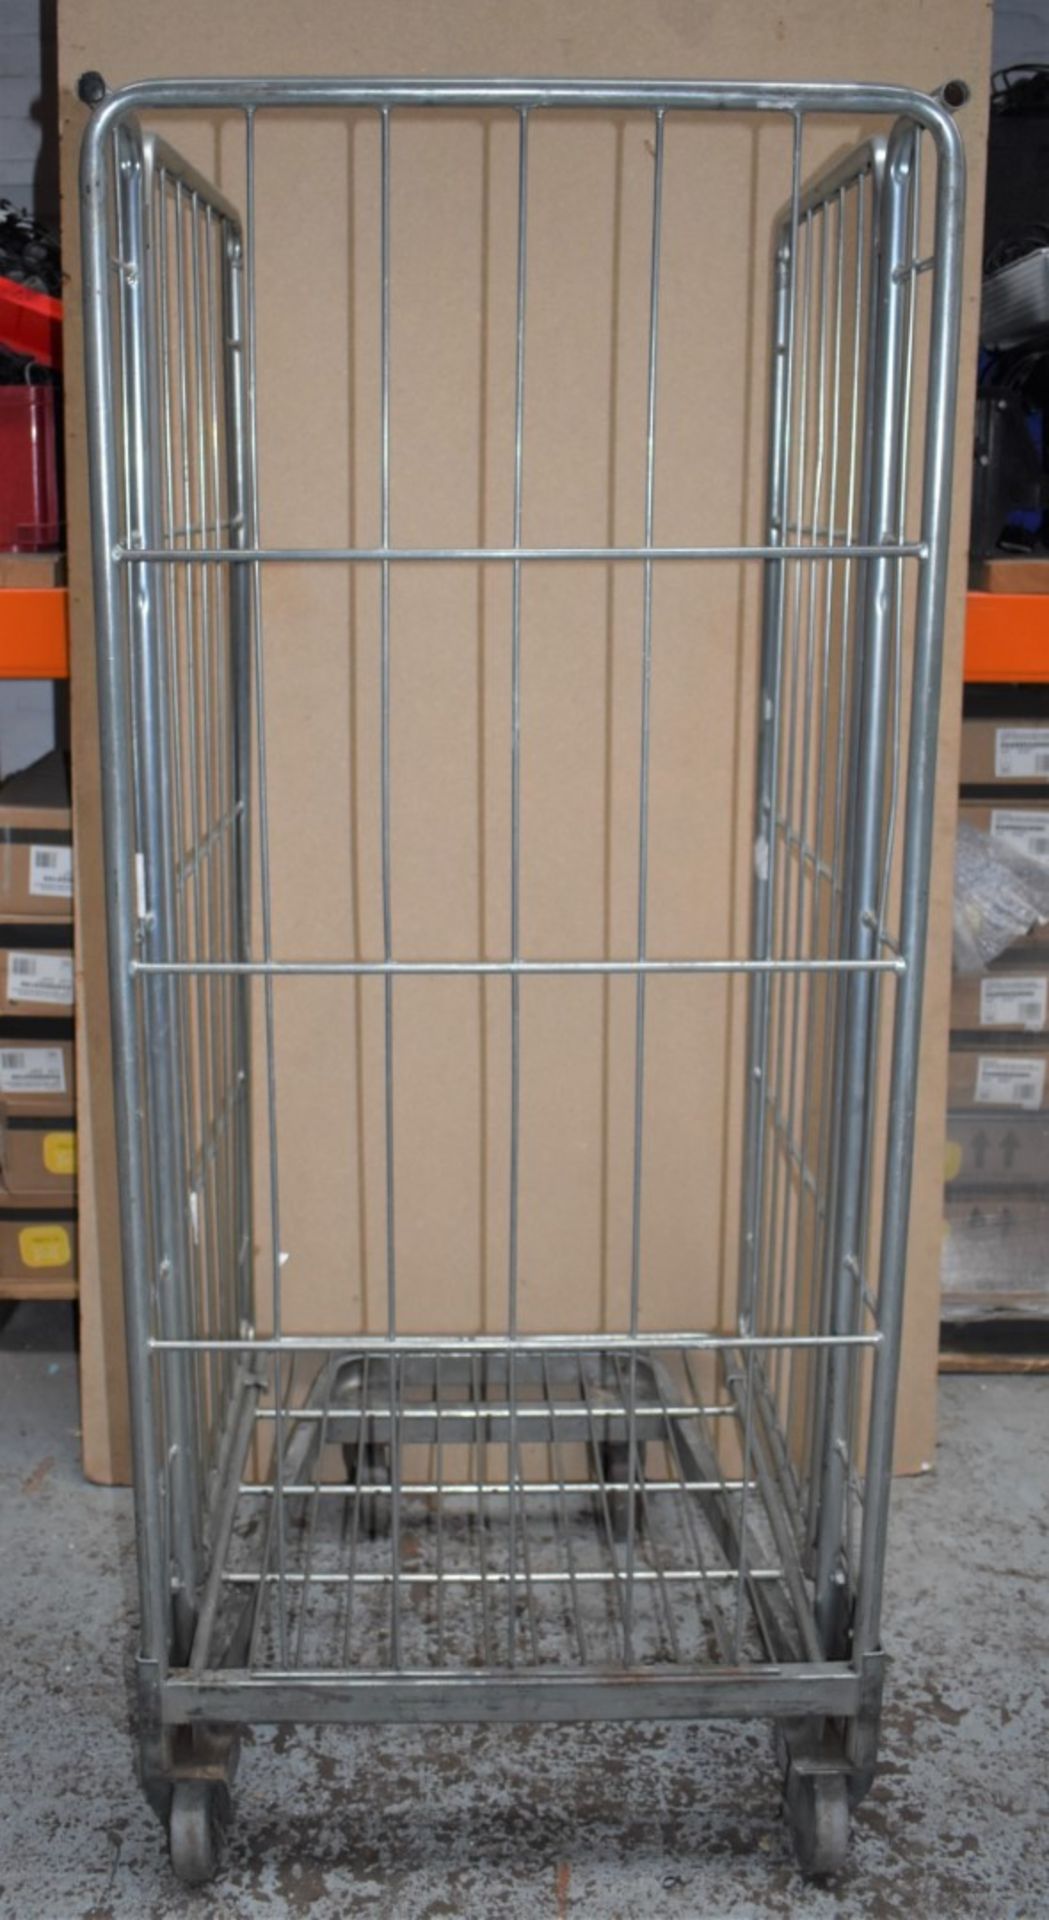 1 x Roller Cage With Heavy Duty Castors - Demountable With Three Sides - Ideal For Storing and - Image 9 of 9